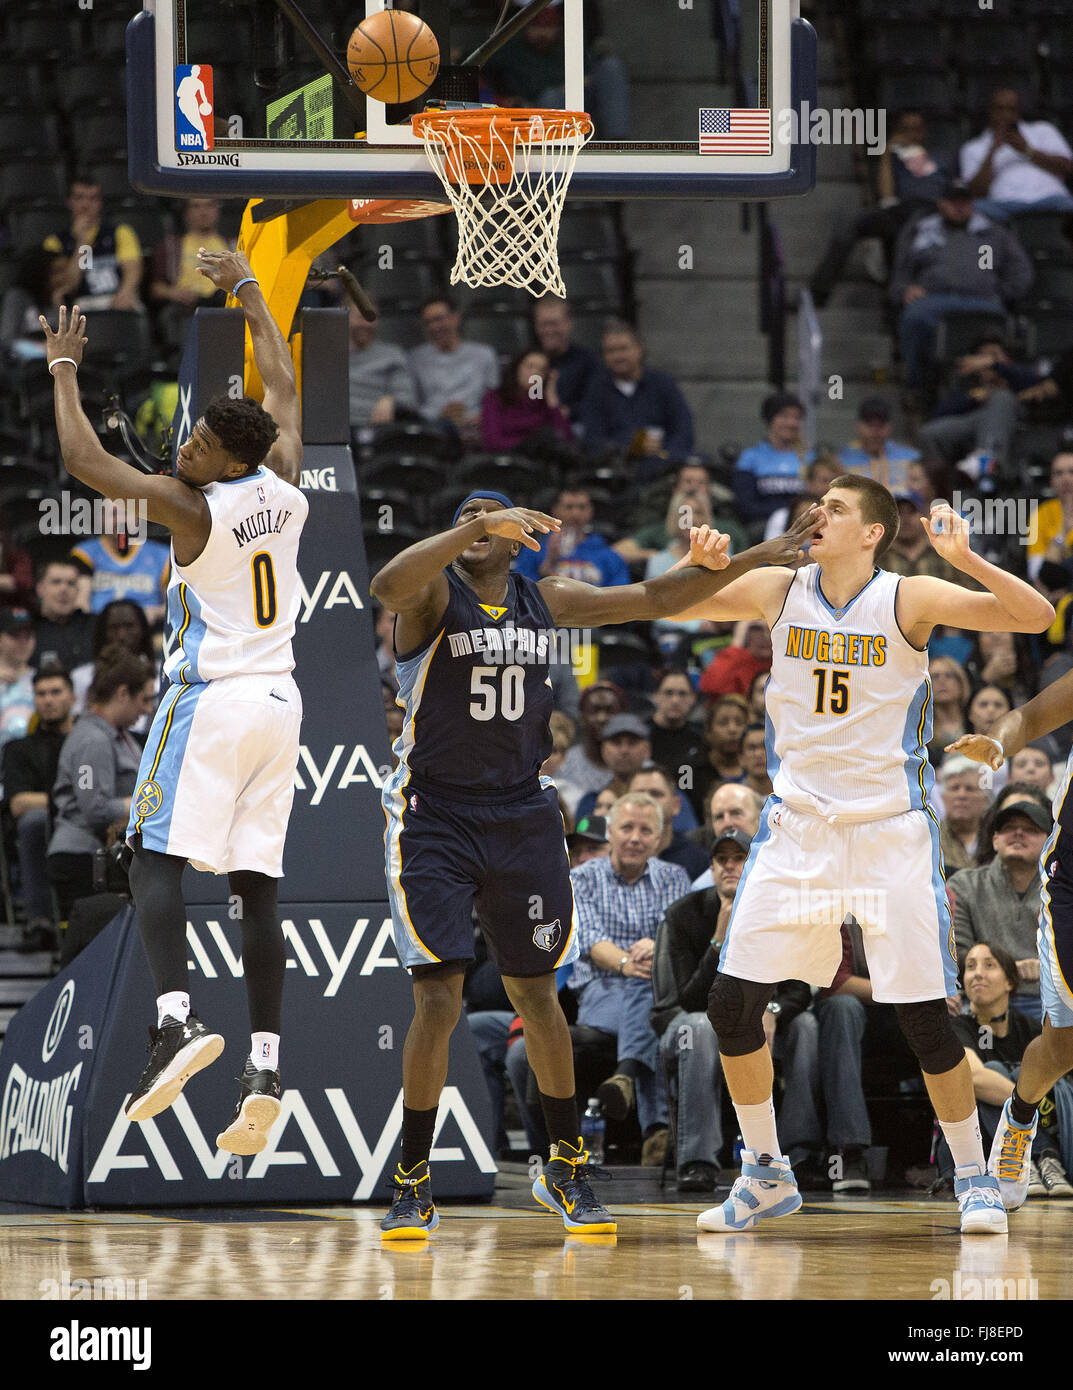 Denver, Colorado, USA. 29th Feb, 2016. Nuggets NIKOLA JOKIC, right, gets a hand on his face by Grizzlies ZACH RANDOLPH, center, as they go up for the rebound during the 2nd. Half at the Pepsi Center Monday night. The Grizzlies beat the Nuggets 103-96. Credit:  Hector Acevedo/ZUMA Wire/Alamy Live News Stock Photo